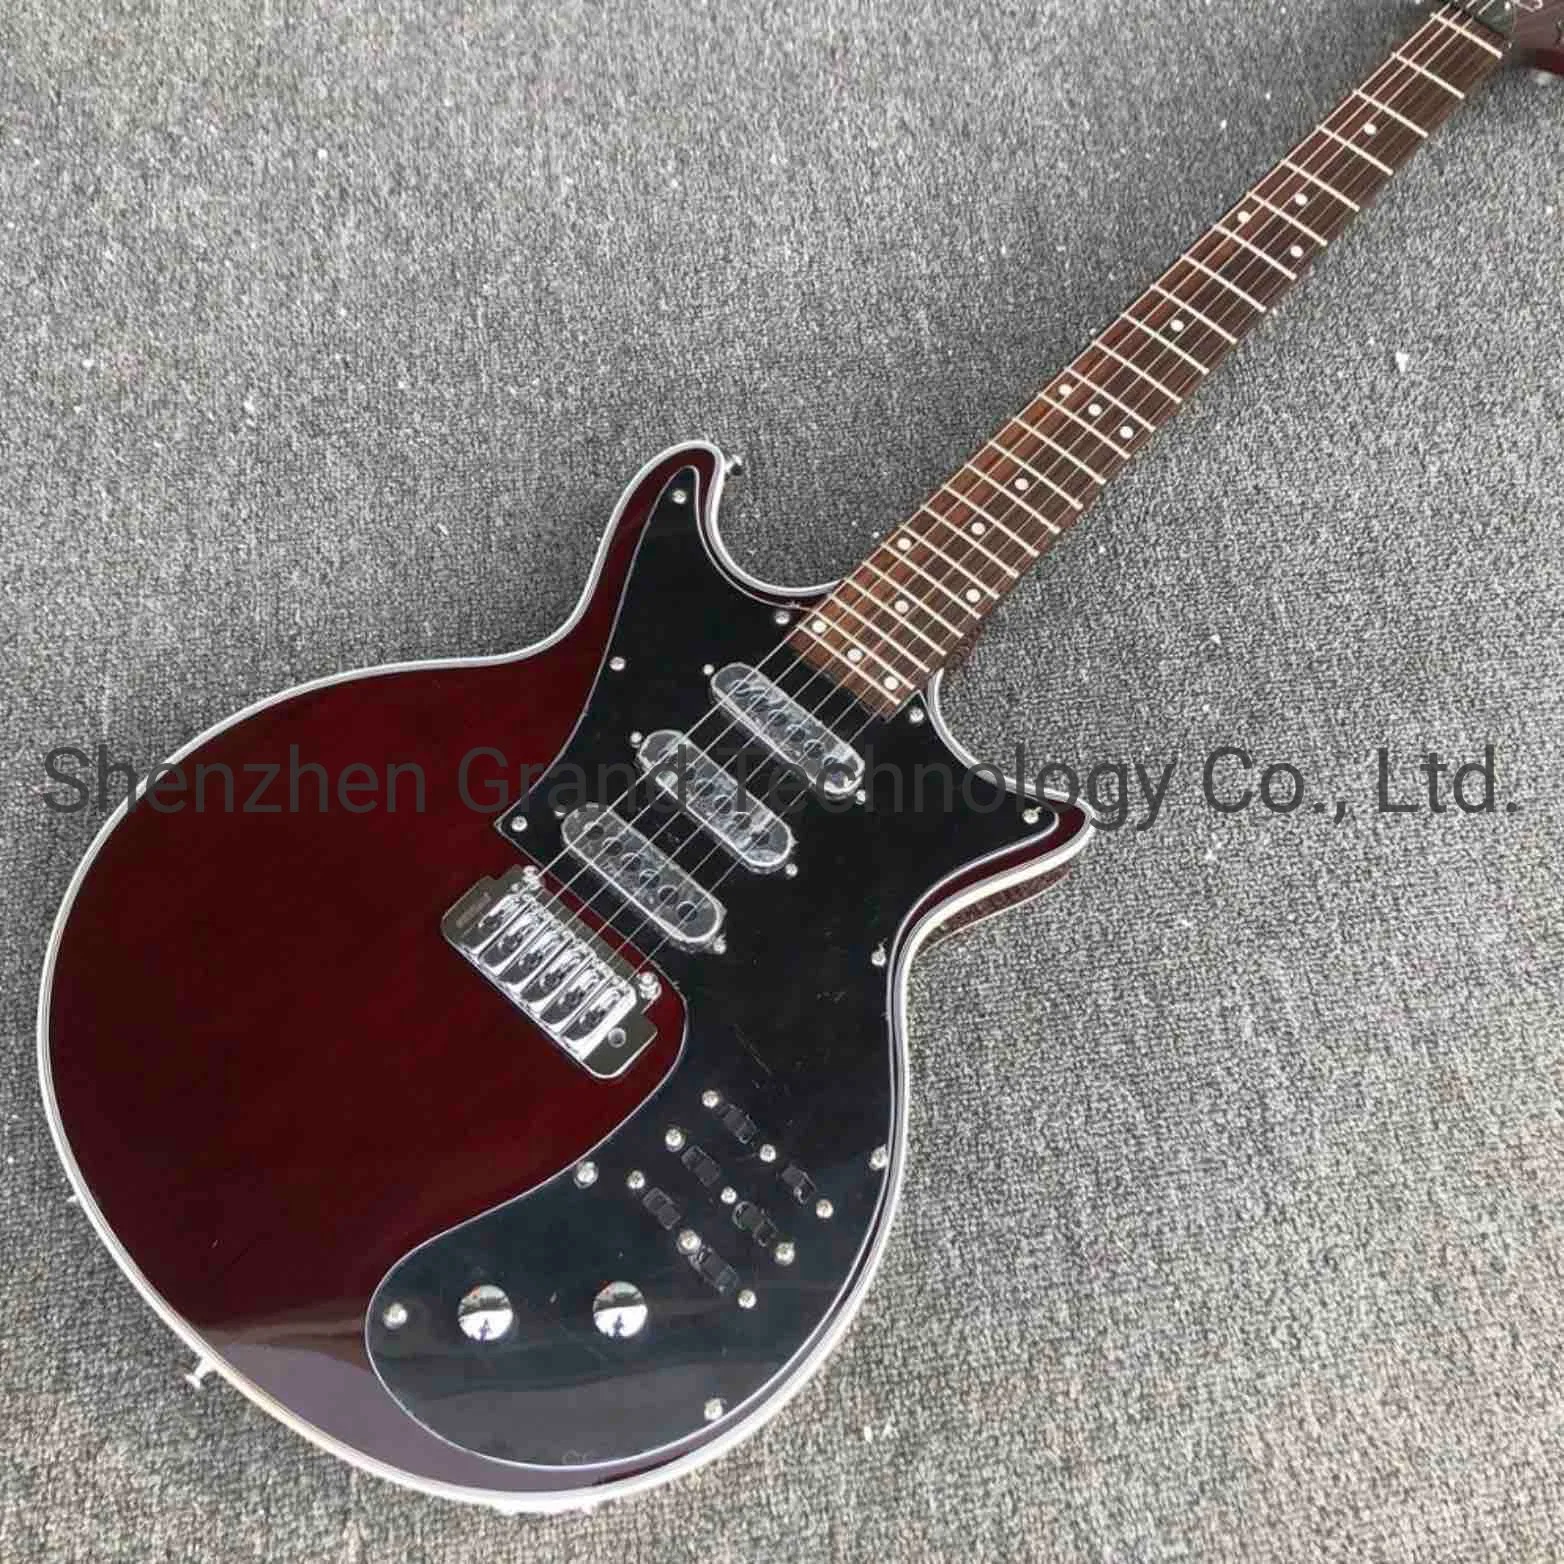 Custom Bm01 Brian May Electric Guitar with Black Pickguard 3 Pickups Tremolo Bridge 24 Frets in Wine Red Color